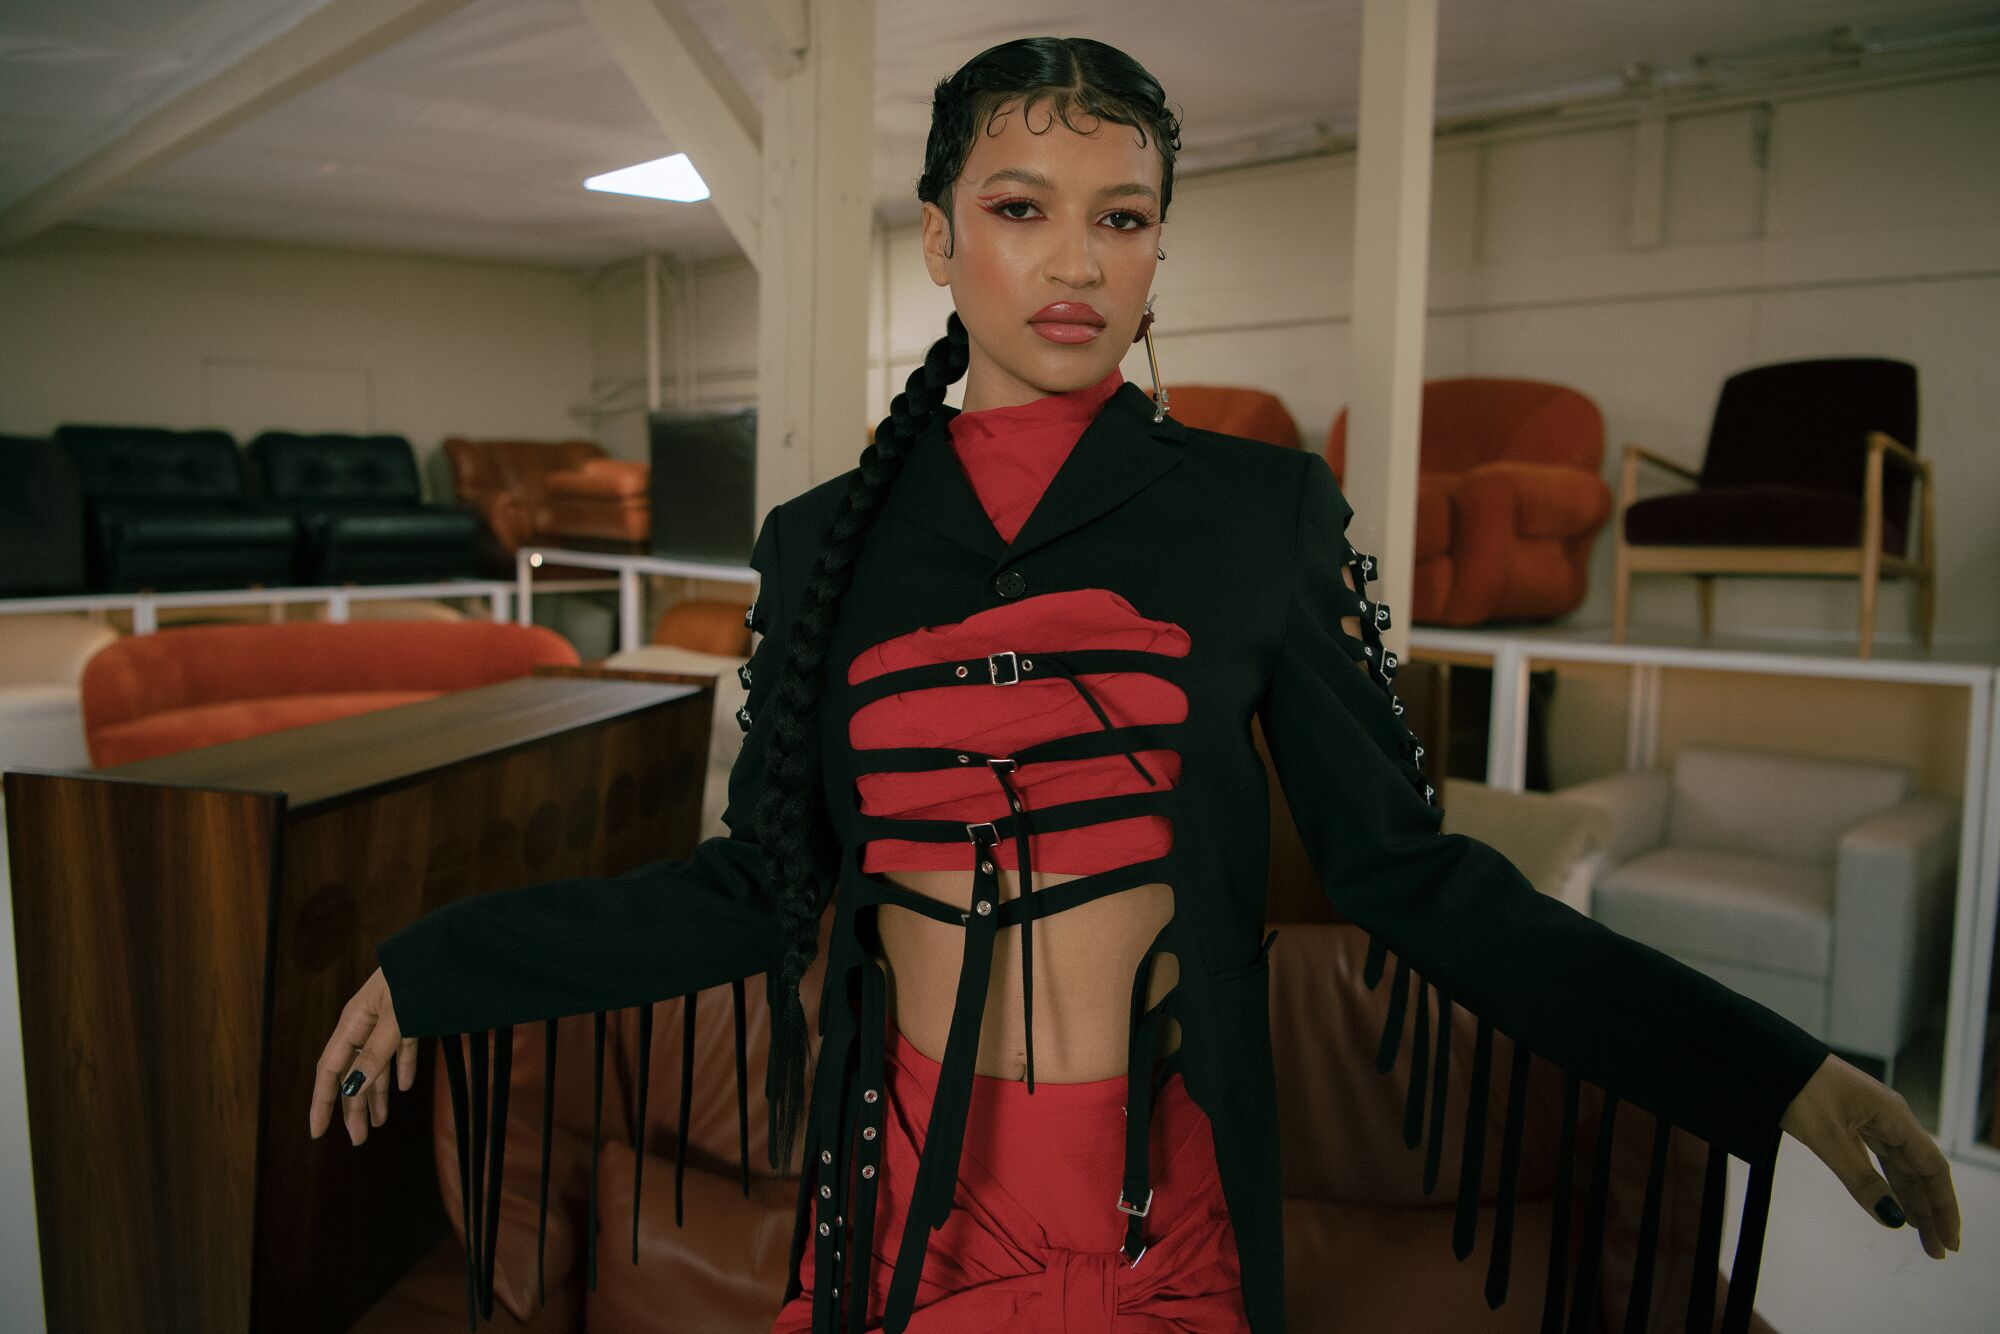 A model wearing a red and black outfit looks at the camera, chairs and couches in the background.